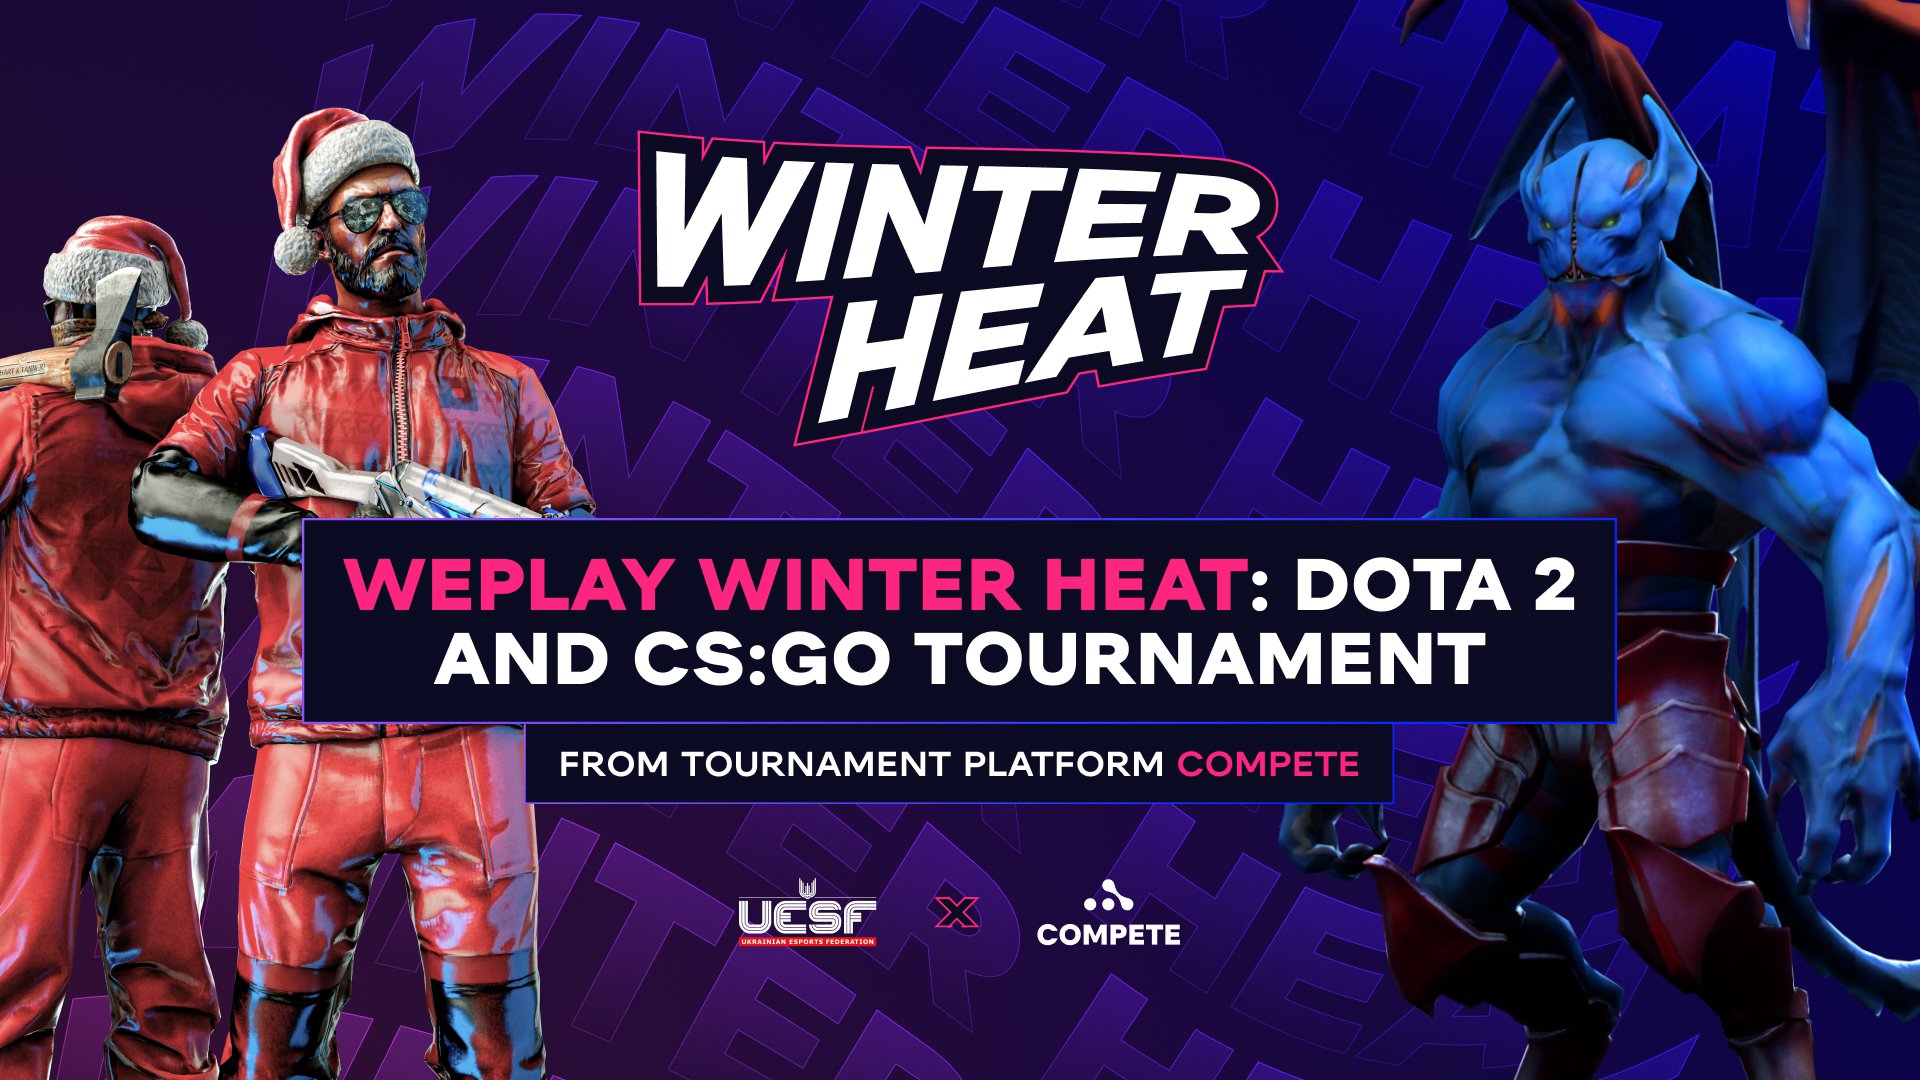 WePlay Winter Heat: CS:GO and Dota 2 tournament from tournament platform Compete. Image: WePlay Holding